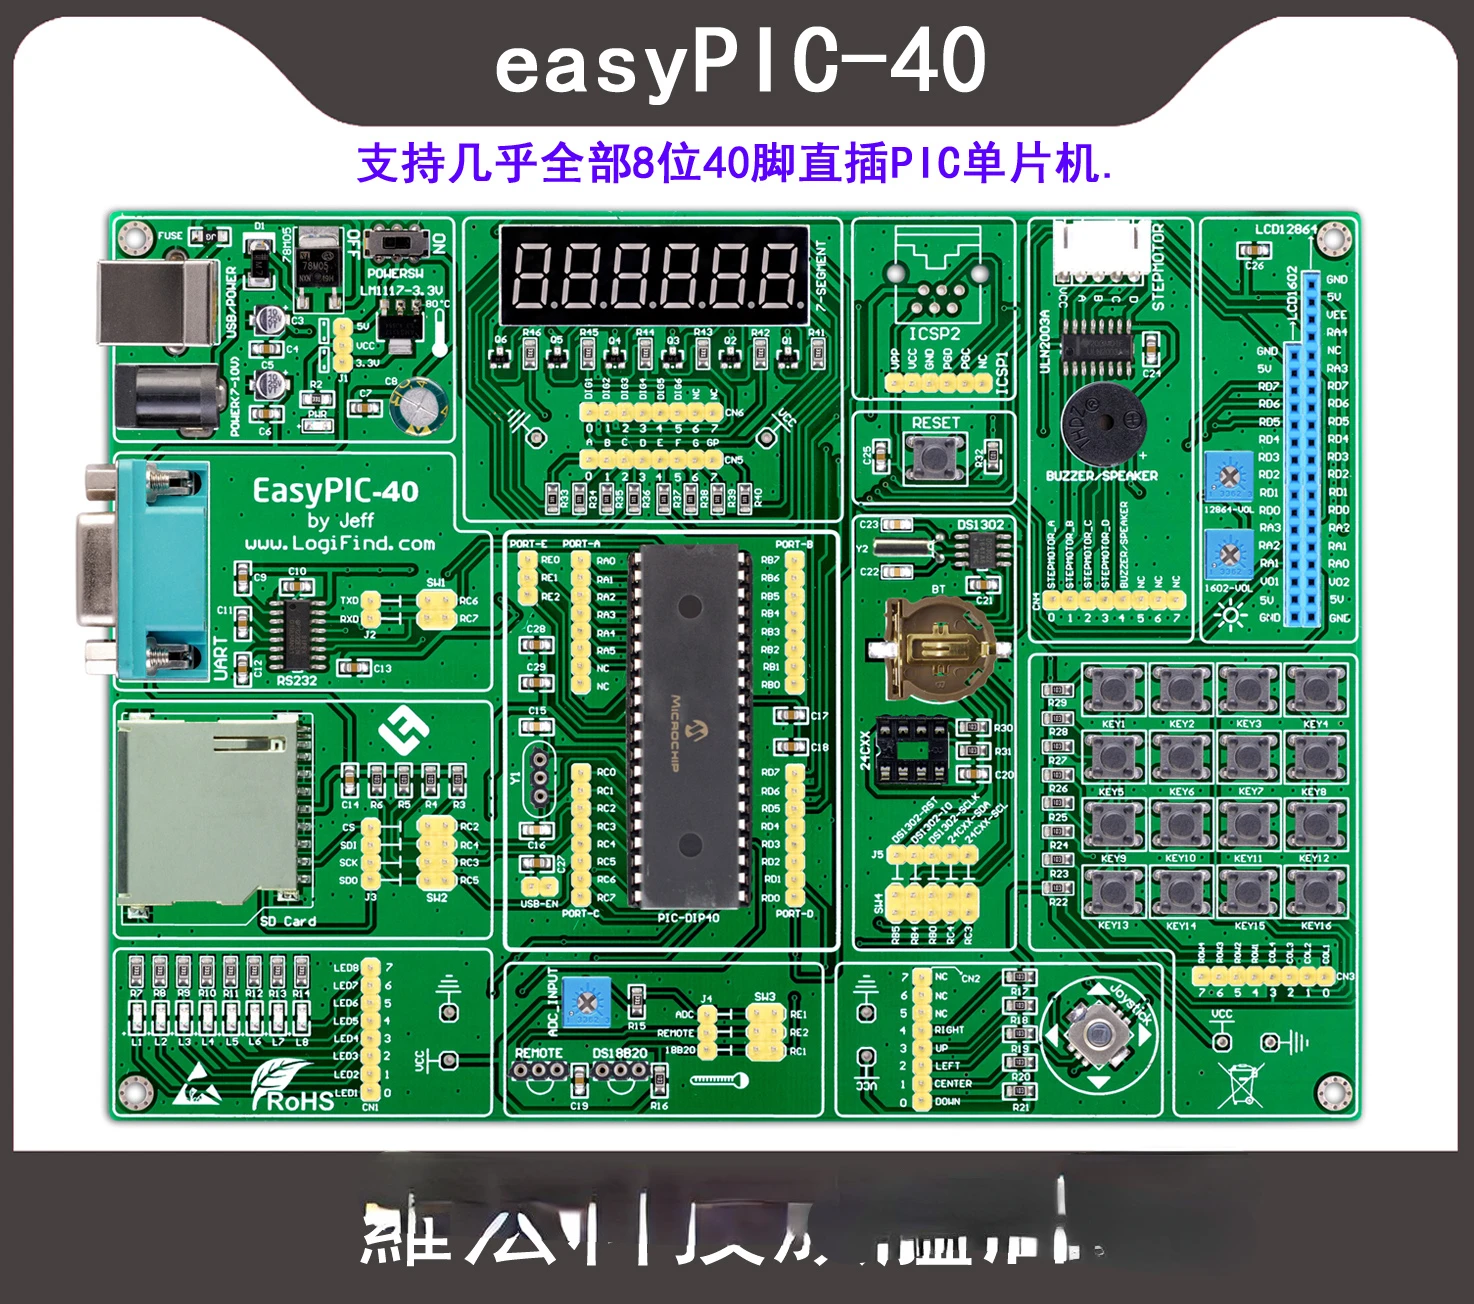 

PIC MCU Learning and Development Board Easypic-40 with PIC16F877A Chip Routines